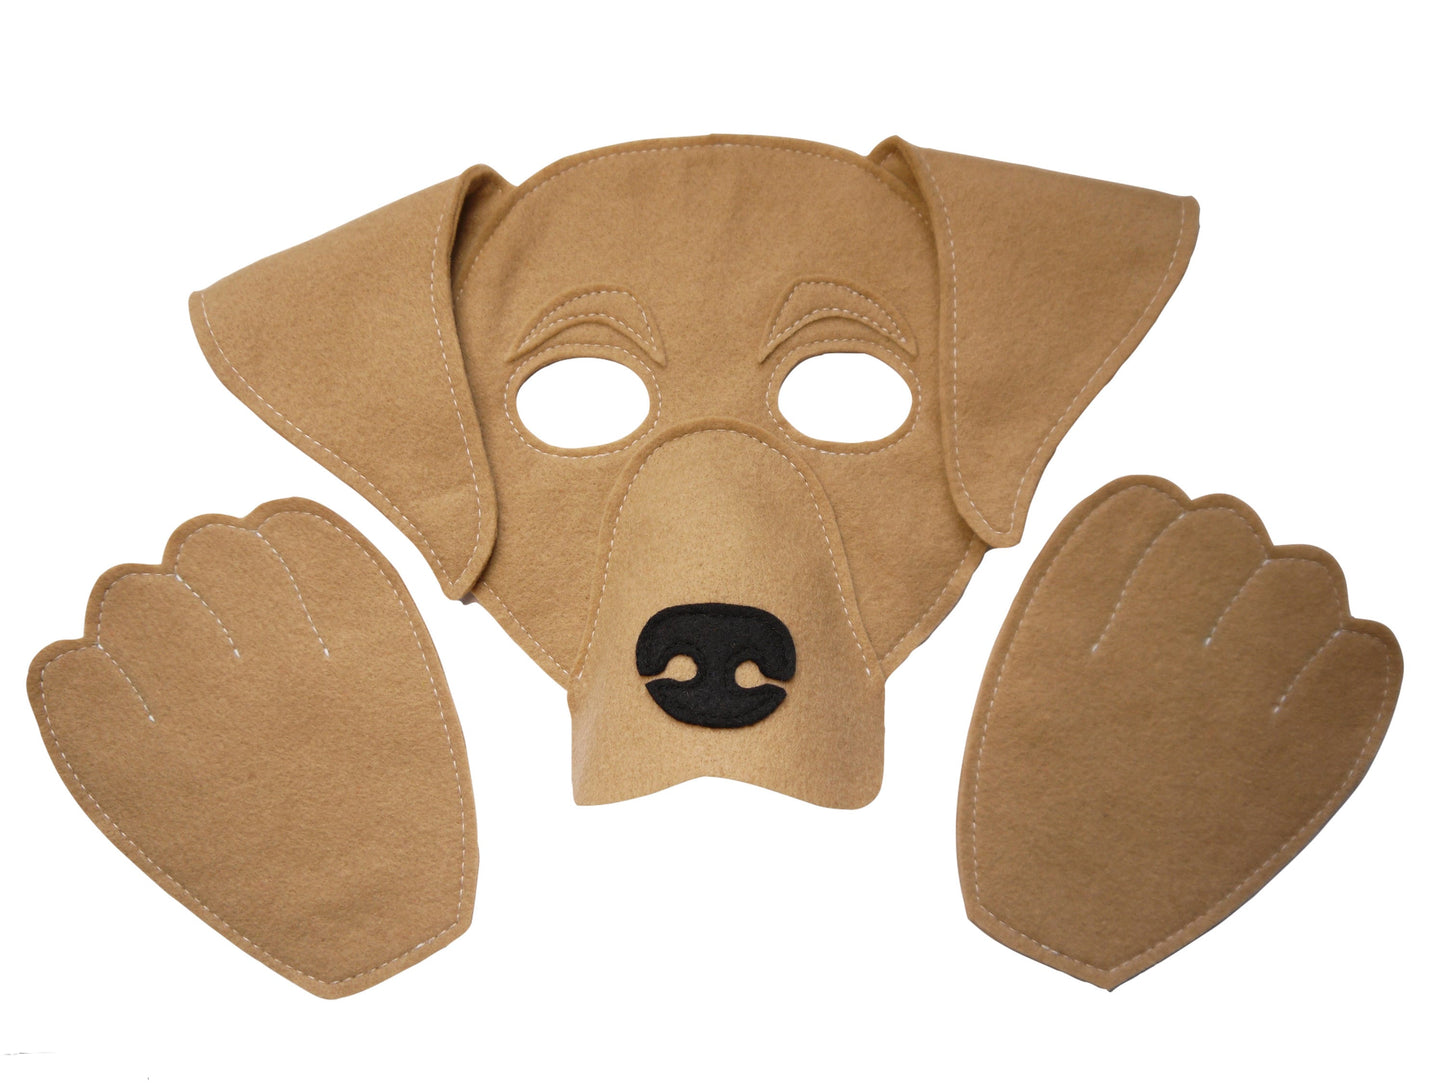 Golden Labrador Dog costume mask and paws